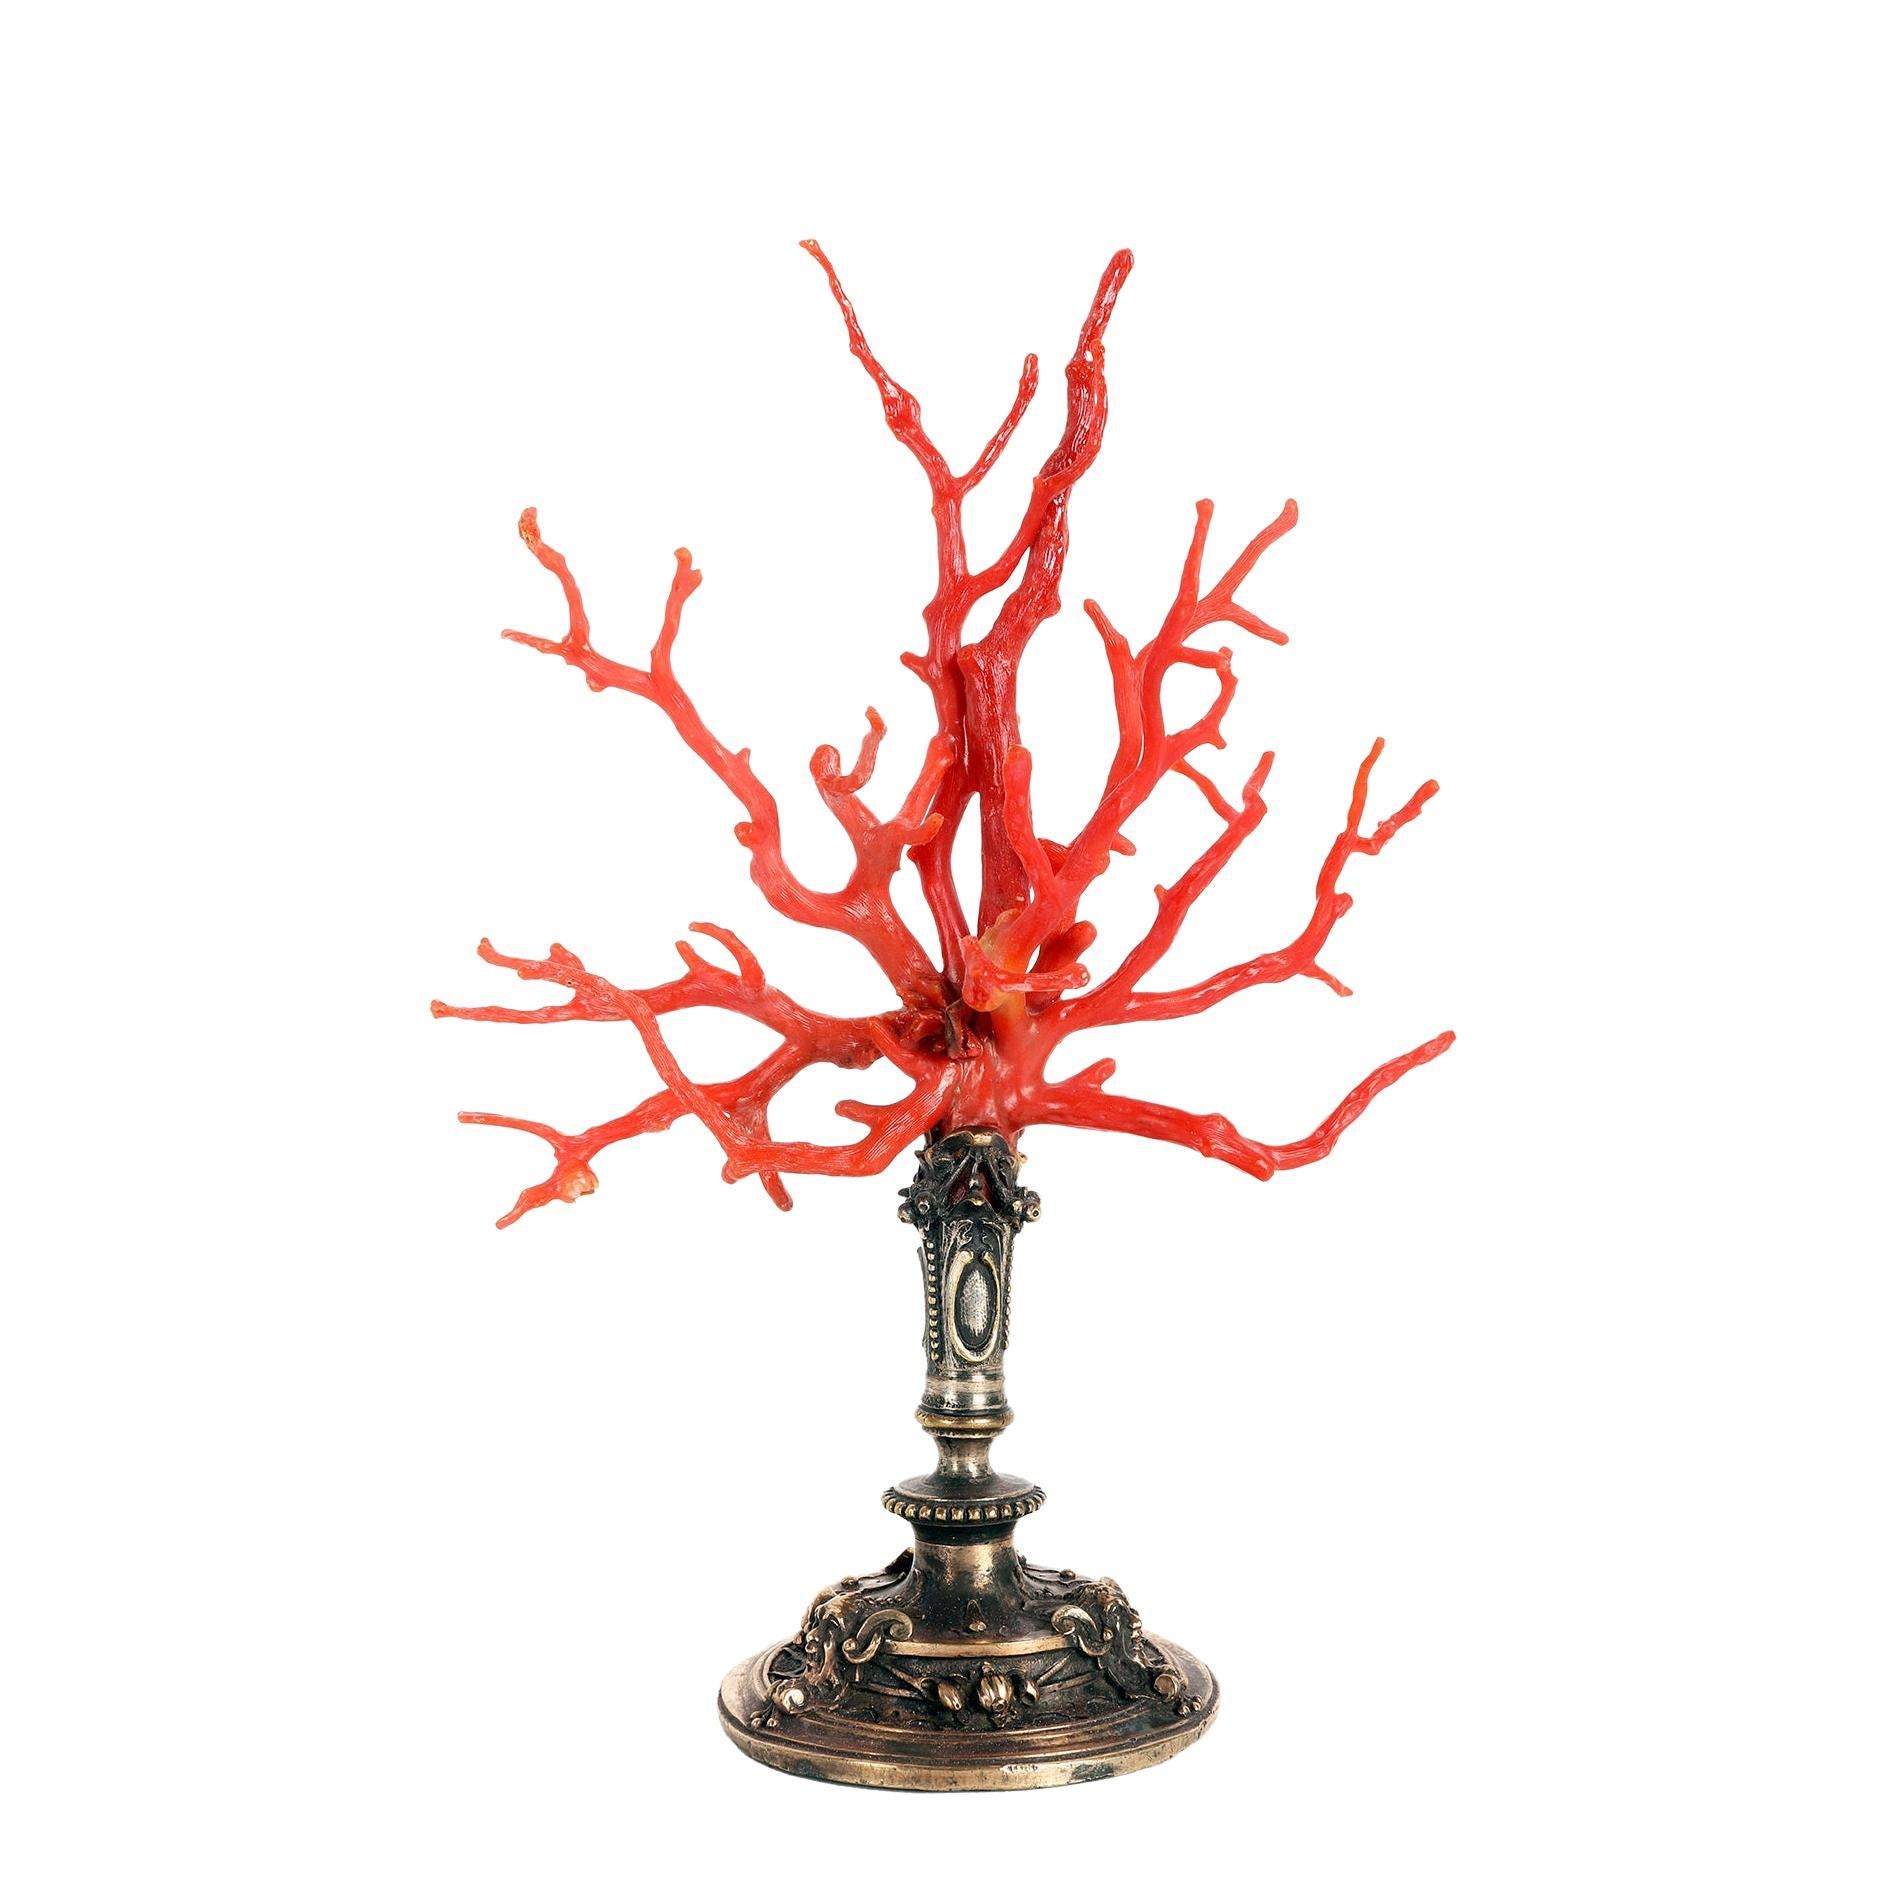 Coral Branch from Wunderkammer, Caltagirone, Sicily, Italy 1820